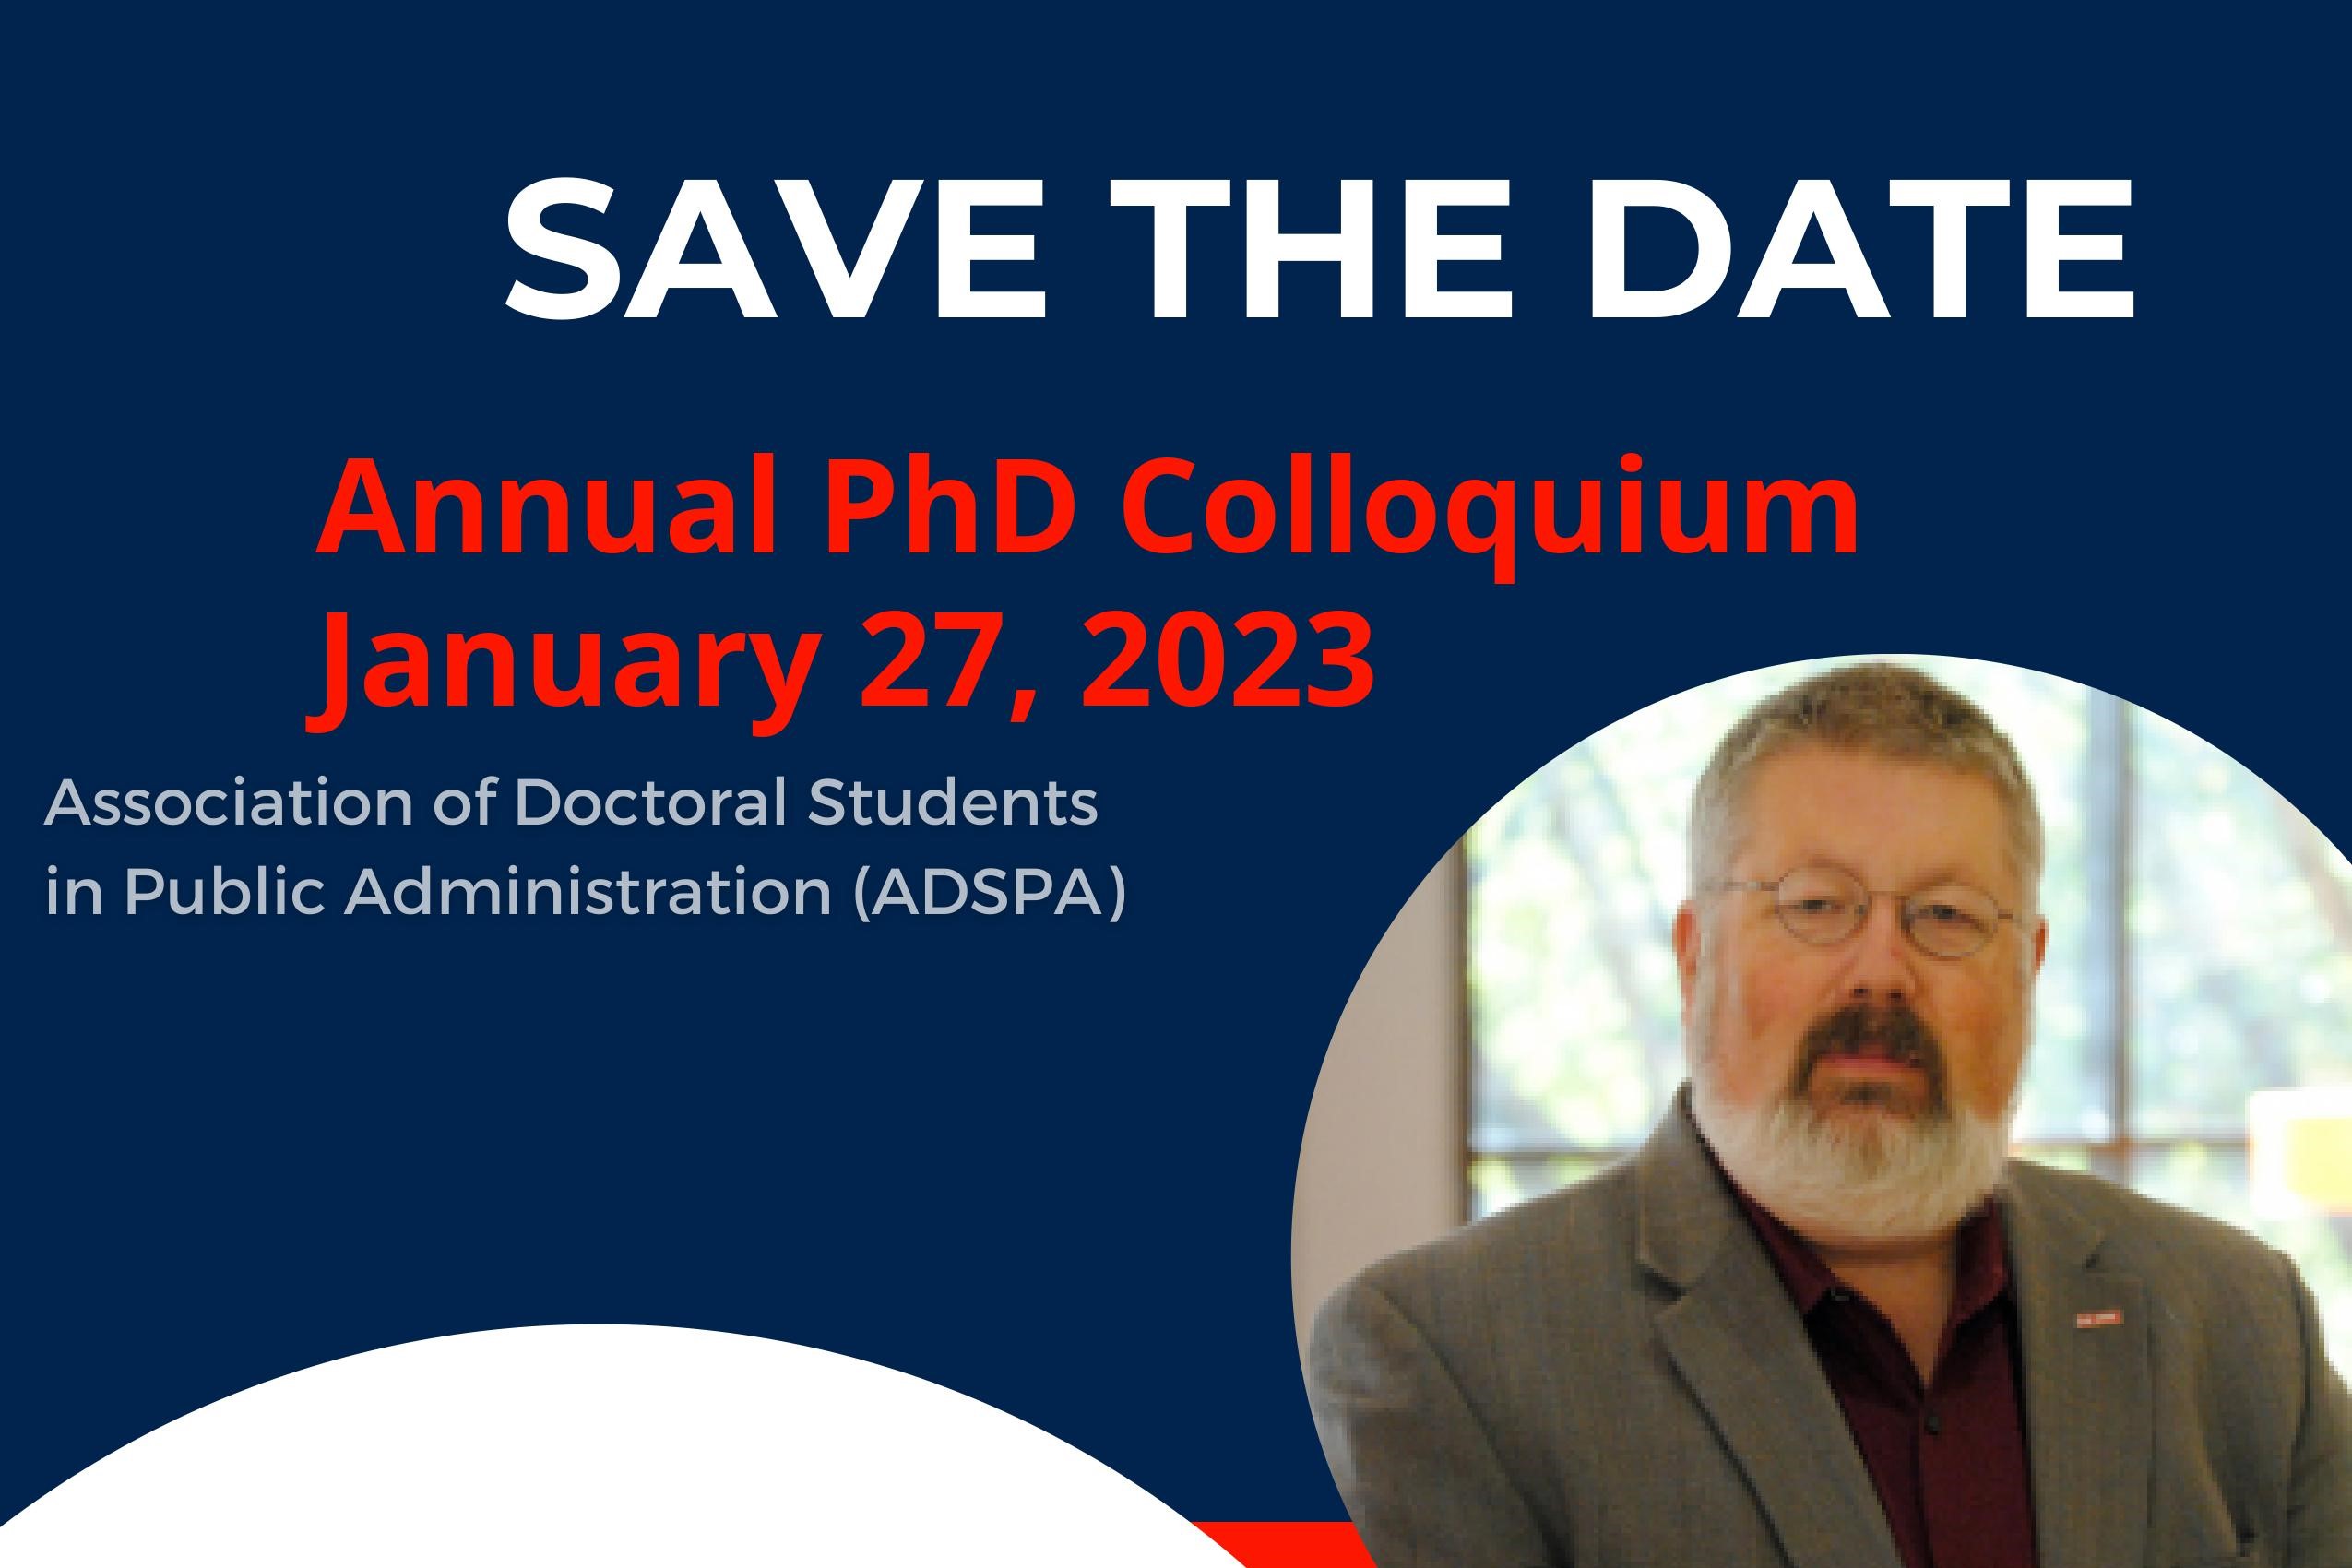 Save the Date: Annual PhD Colloquium - January 27, 2023. Association of Doctoral Students in Public Administration (ADSPA)